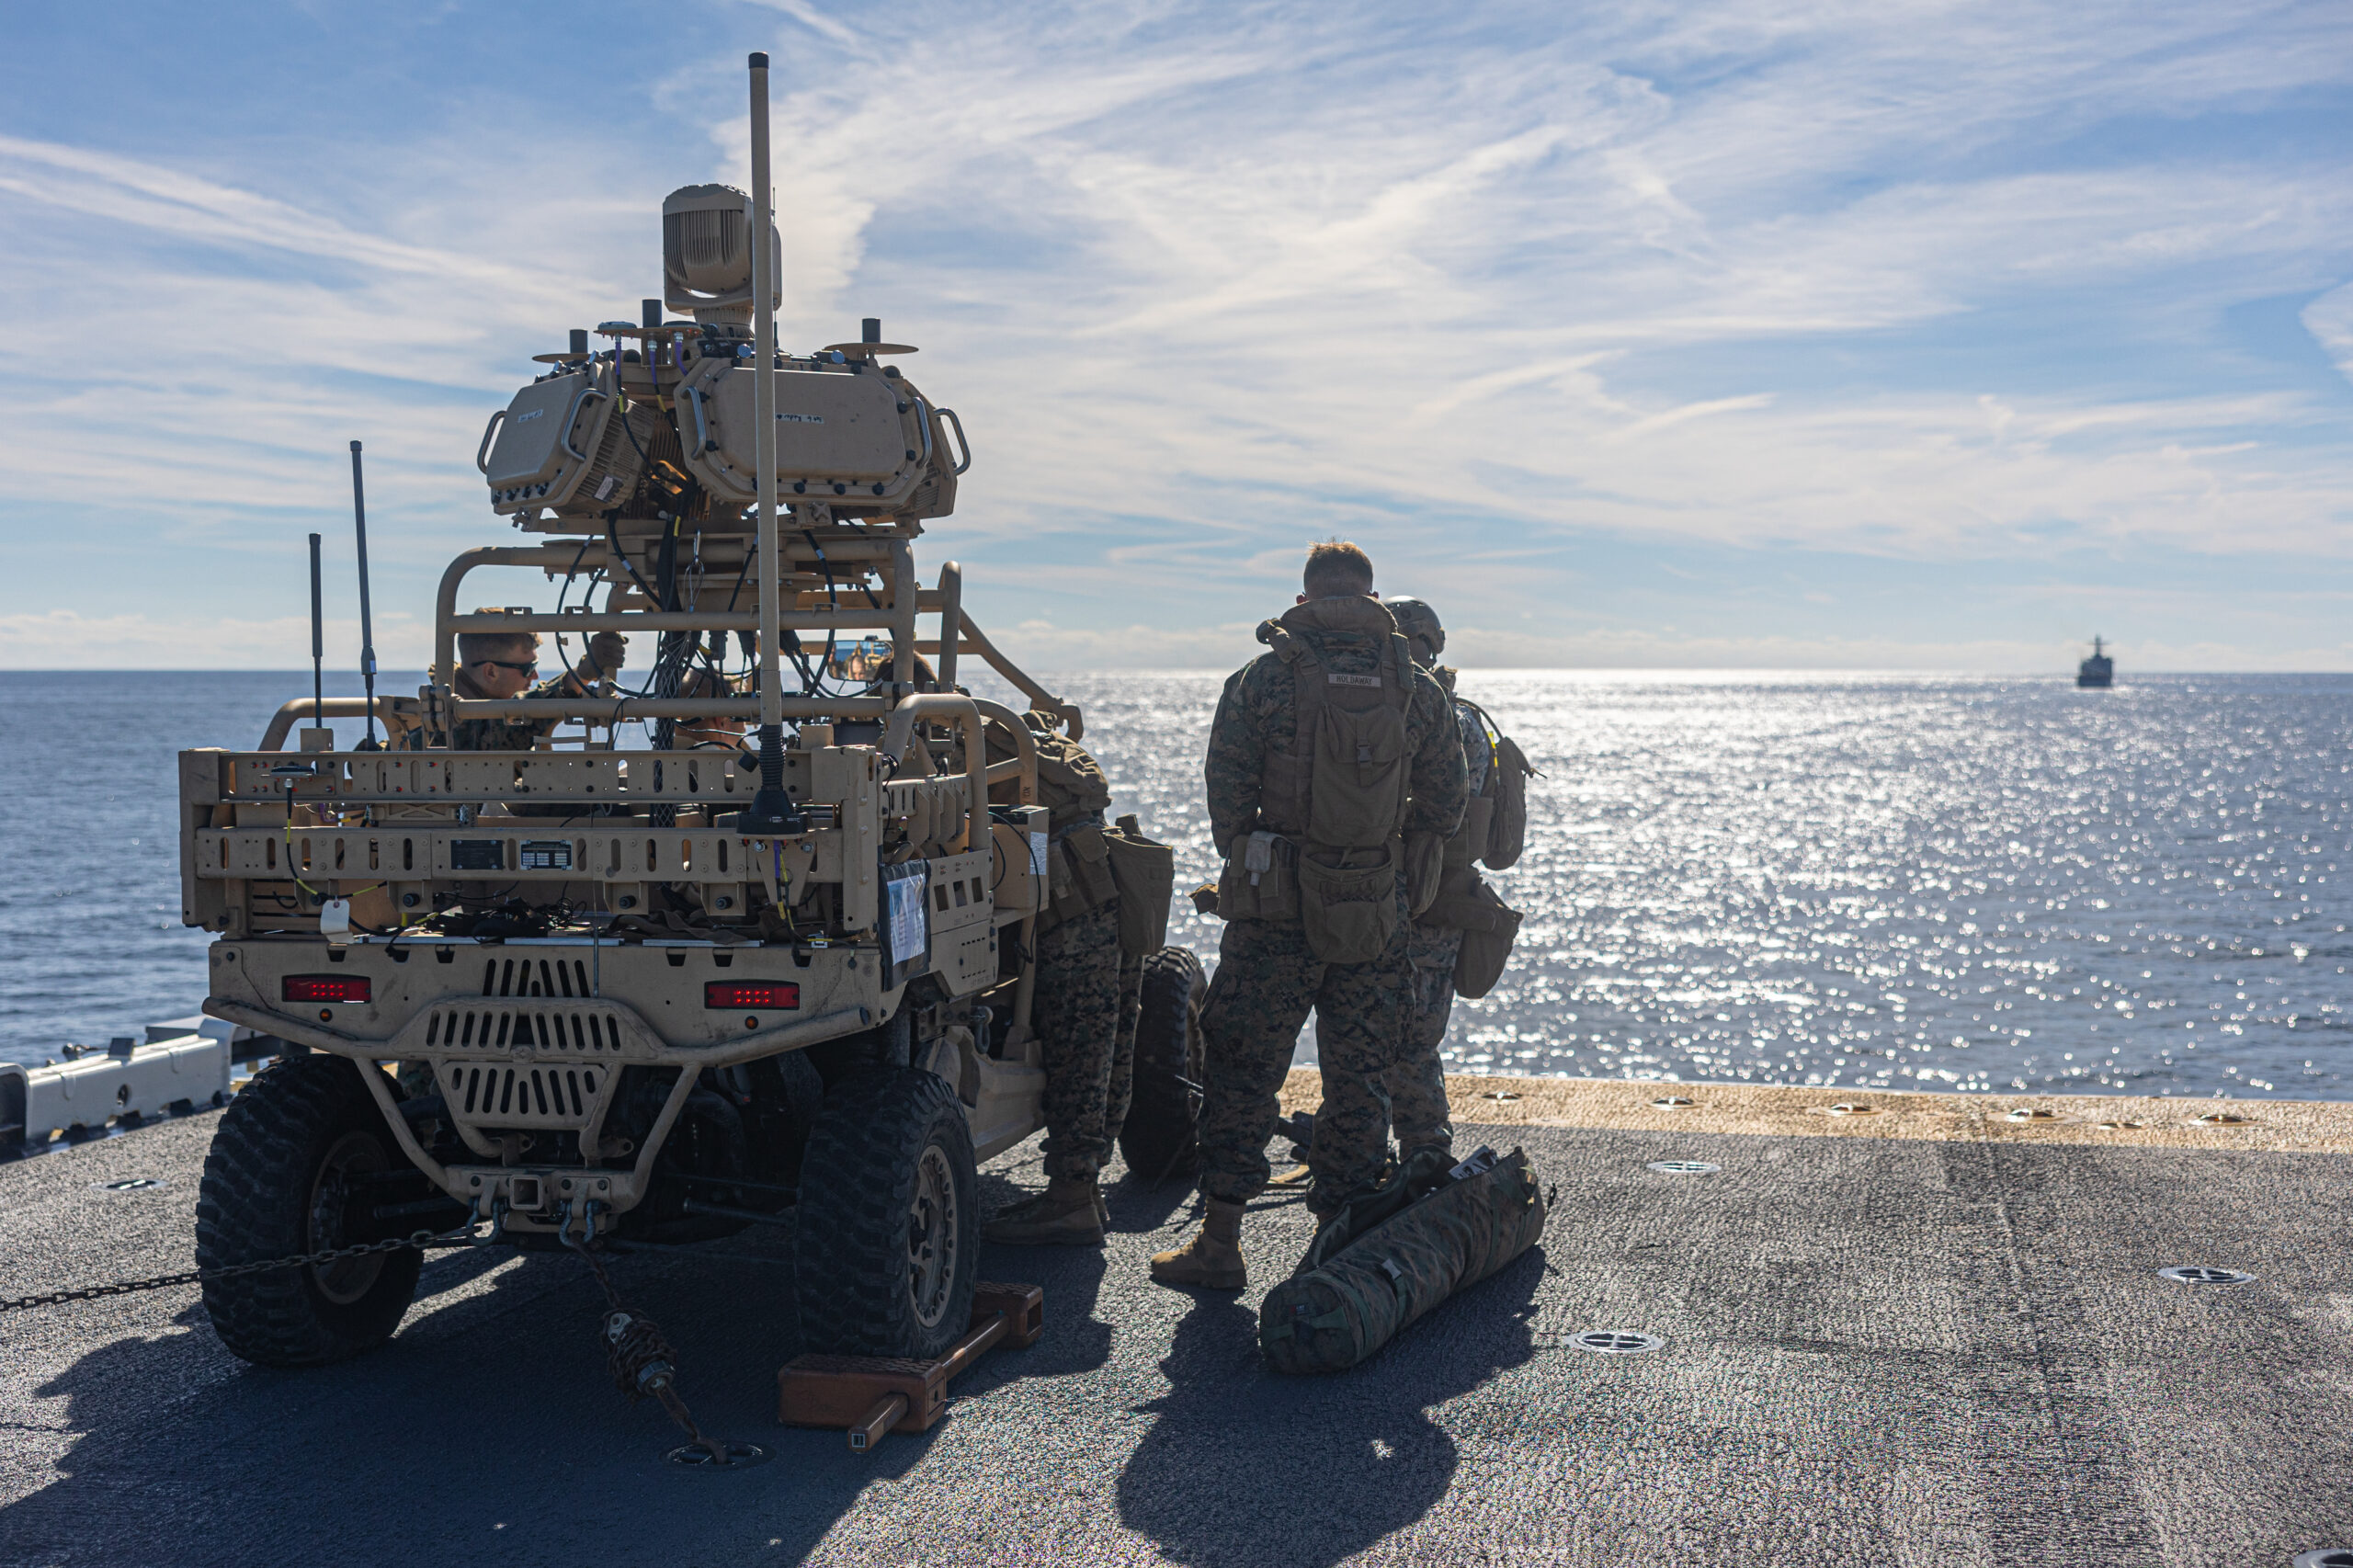 Today’s indispensable tool for the Army and Marines is radar for C-UAS and C-RAM